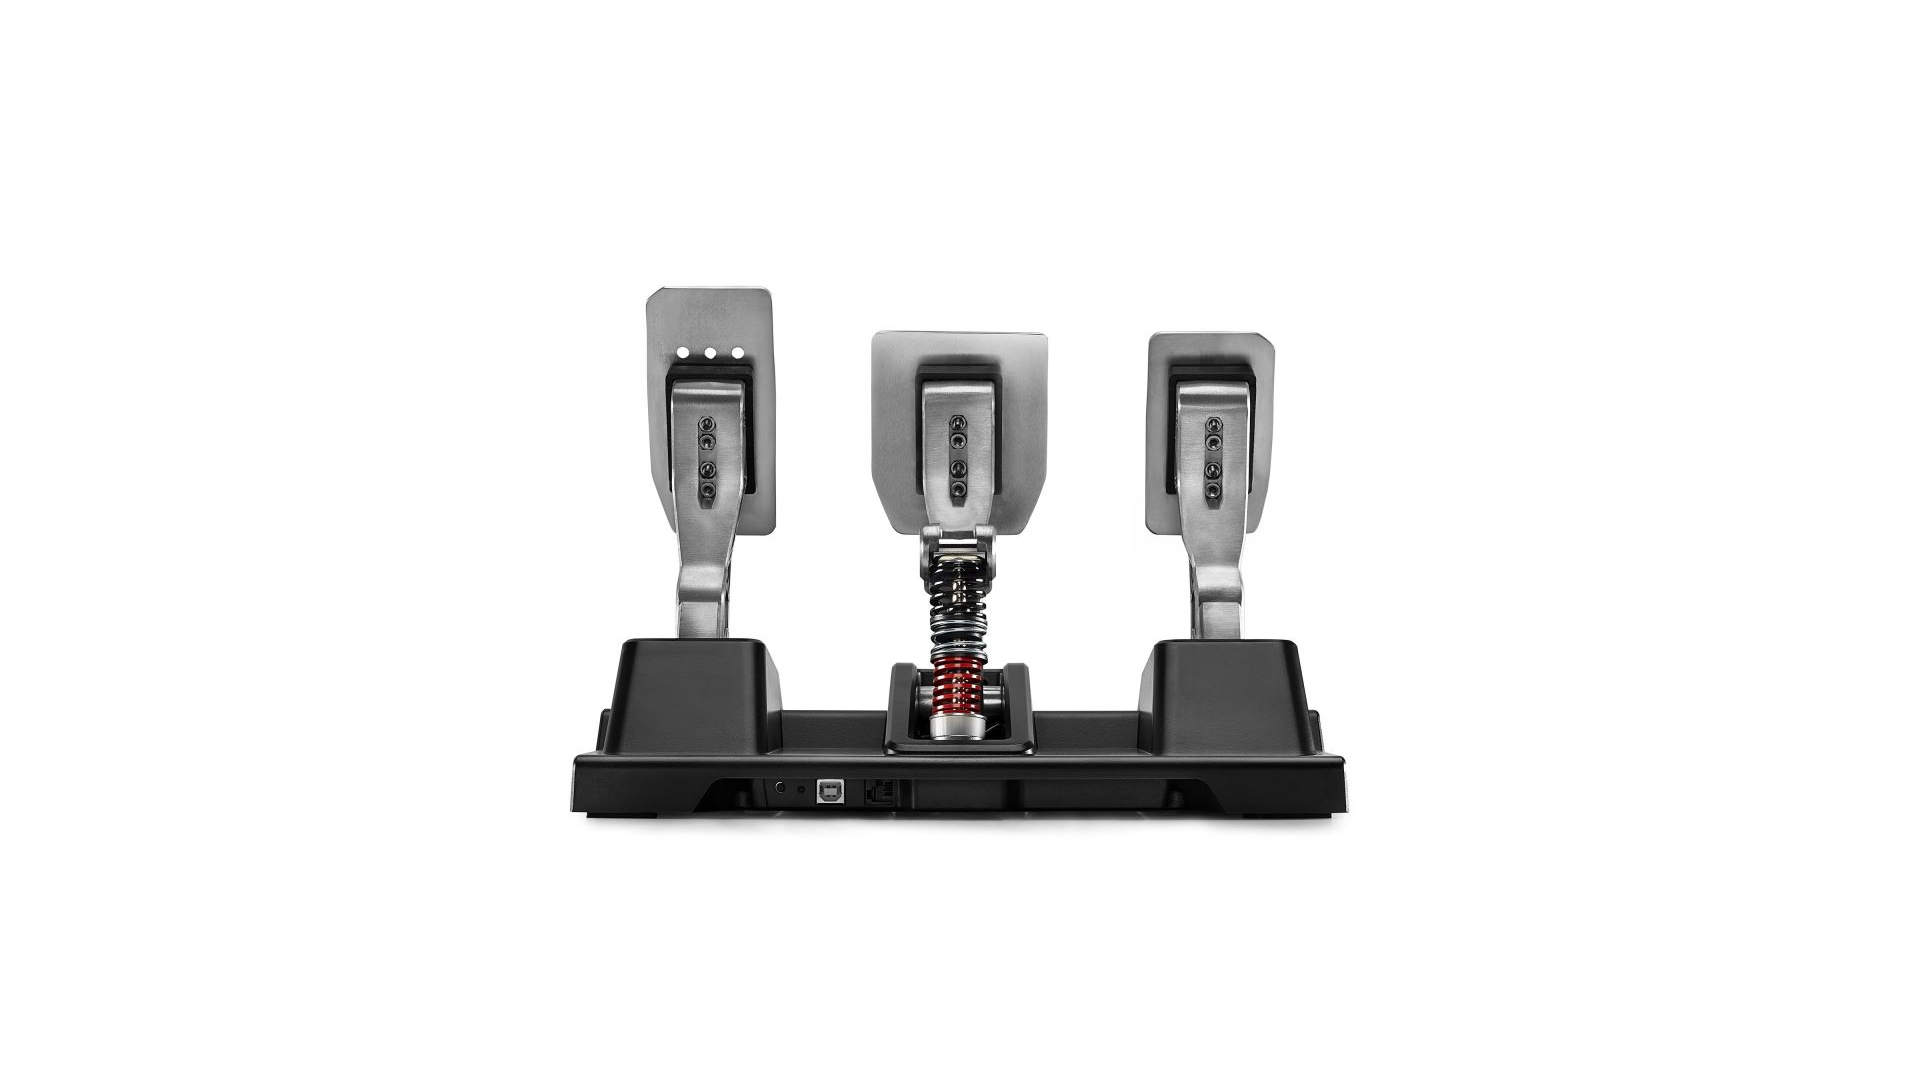 https://shop.recart-sim.com/641-large_default/thrustmaster-t-lcm-pedals-pedal-set-for-pc-ps5-ps4-and-xbox-one-xbox-series-x.jpg